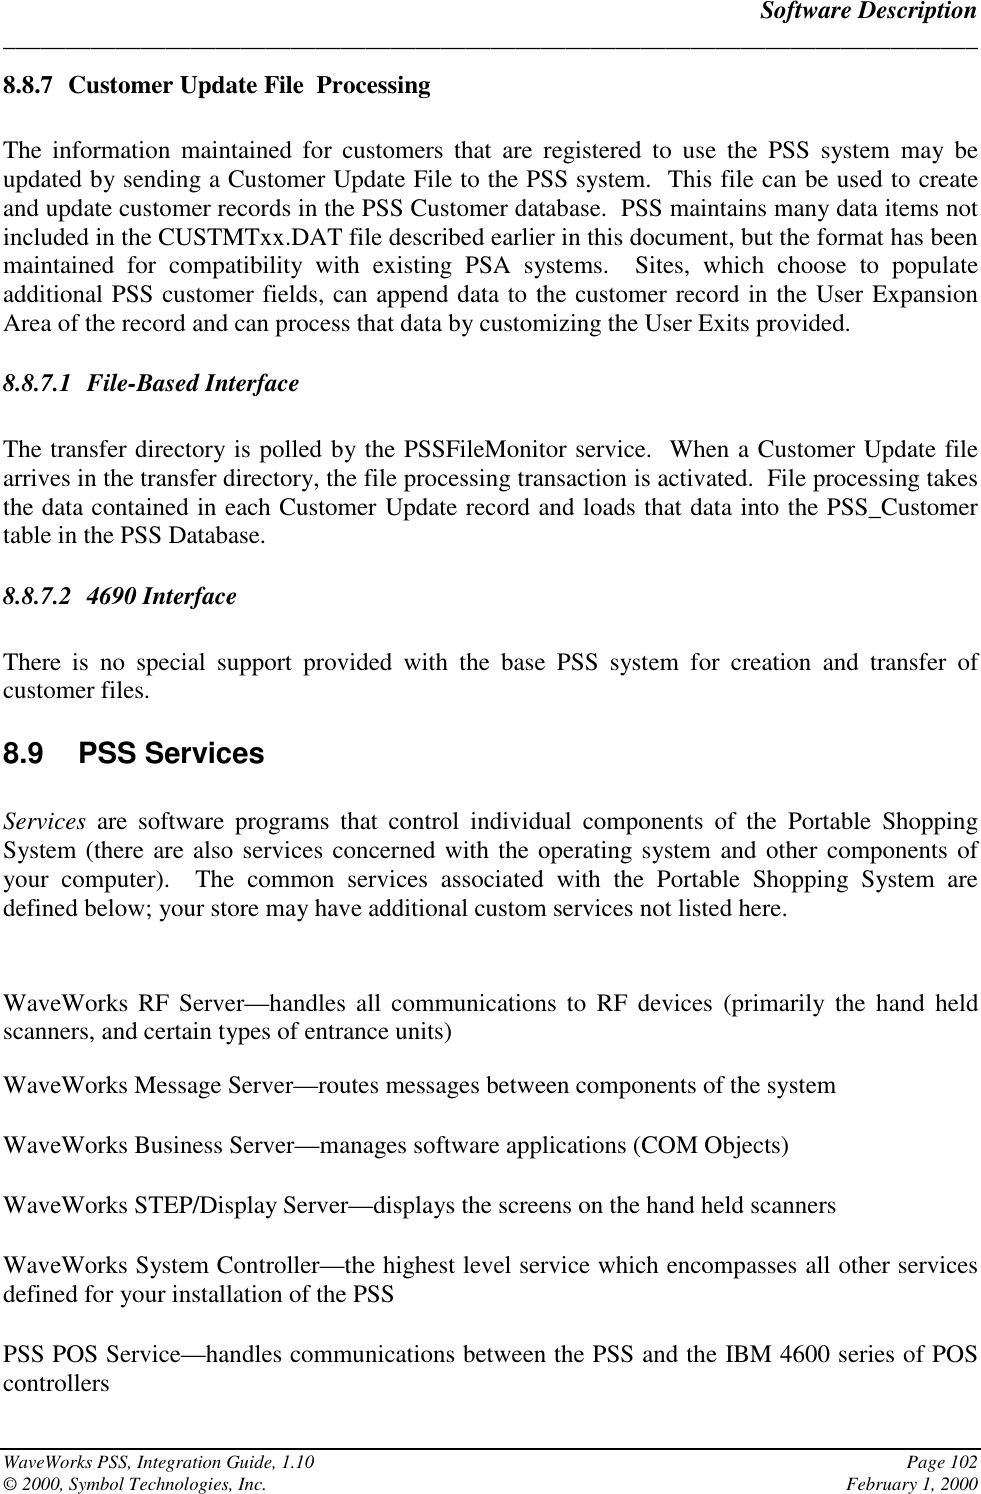 Software Description______________________________________________________________________________WaveWorks PSS, Integration Guide, 1.10 Page 102© 2000, Symbol Technologies, Inc. February 1, 20008.8.7 Customer Update File  ProcessingThe information maintained for customers that are registered to use the PSS system may beupdated by sending a Customer Update File to the PSS system.  This file can be used to createand update customer records in the PSS Customer database.  PSS maintains many data items notincluded in the CUSTMTxx.DAT file described earlier in this document, but the format has beenmaintained for compatibility with existing PSA systems.  Sites, which choose to populateadditional PSS customer fields, can append data to the customer record in the User ExpansionArea of the record and can process that data by customizing the User Exits provided.8.8.7.1 File-Based InterfaceThe transfer directory is polled by the PSSFileMonitor service.  When a Customer Update filearrives in the transfer directory, the file processing transaction is activated.  File processing takesthe data contained in each Customer Update record and loads that data into the PSS_Customertable in the PSS Database.8.8.7.2 4690 InterfaceThere is no special support provided with the base PSS system for creation and transfer ofcustomer files.8.9 PSS ServicesServices  are software programs that control individual components of the Portable ShoppingSystem (there are also services concerned with the operating system and other components ofyour computer).  The common services associated with the Portable Shopping System aredefined below; your store may have additional custom services not listed here.WaveWorks RF Server—handles all communications to RF devices (primarily the hand heldscanners, and certain types of entrance units)WaveWorks Message Server—routes messages between components of the systemWaveWorks Business Server—manages software applications (COM Objects)WaveWorks STEP/Display Server—displays the screens on the hand held scannersWaveWorks System Controller—the highest level service which encompasses all other servicesdefined for your installation of the PSSPSS POS Service—handles communications between the PSS and the IBM 4600 series of POScontrollers